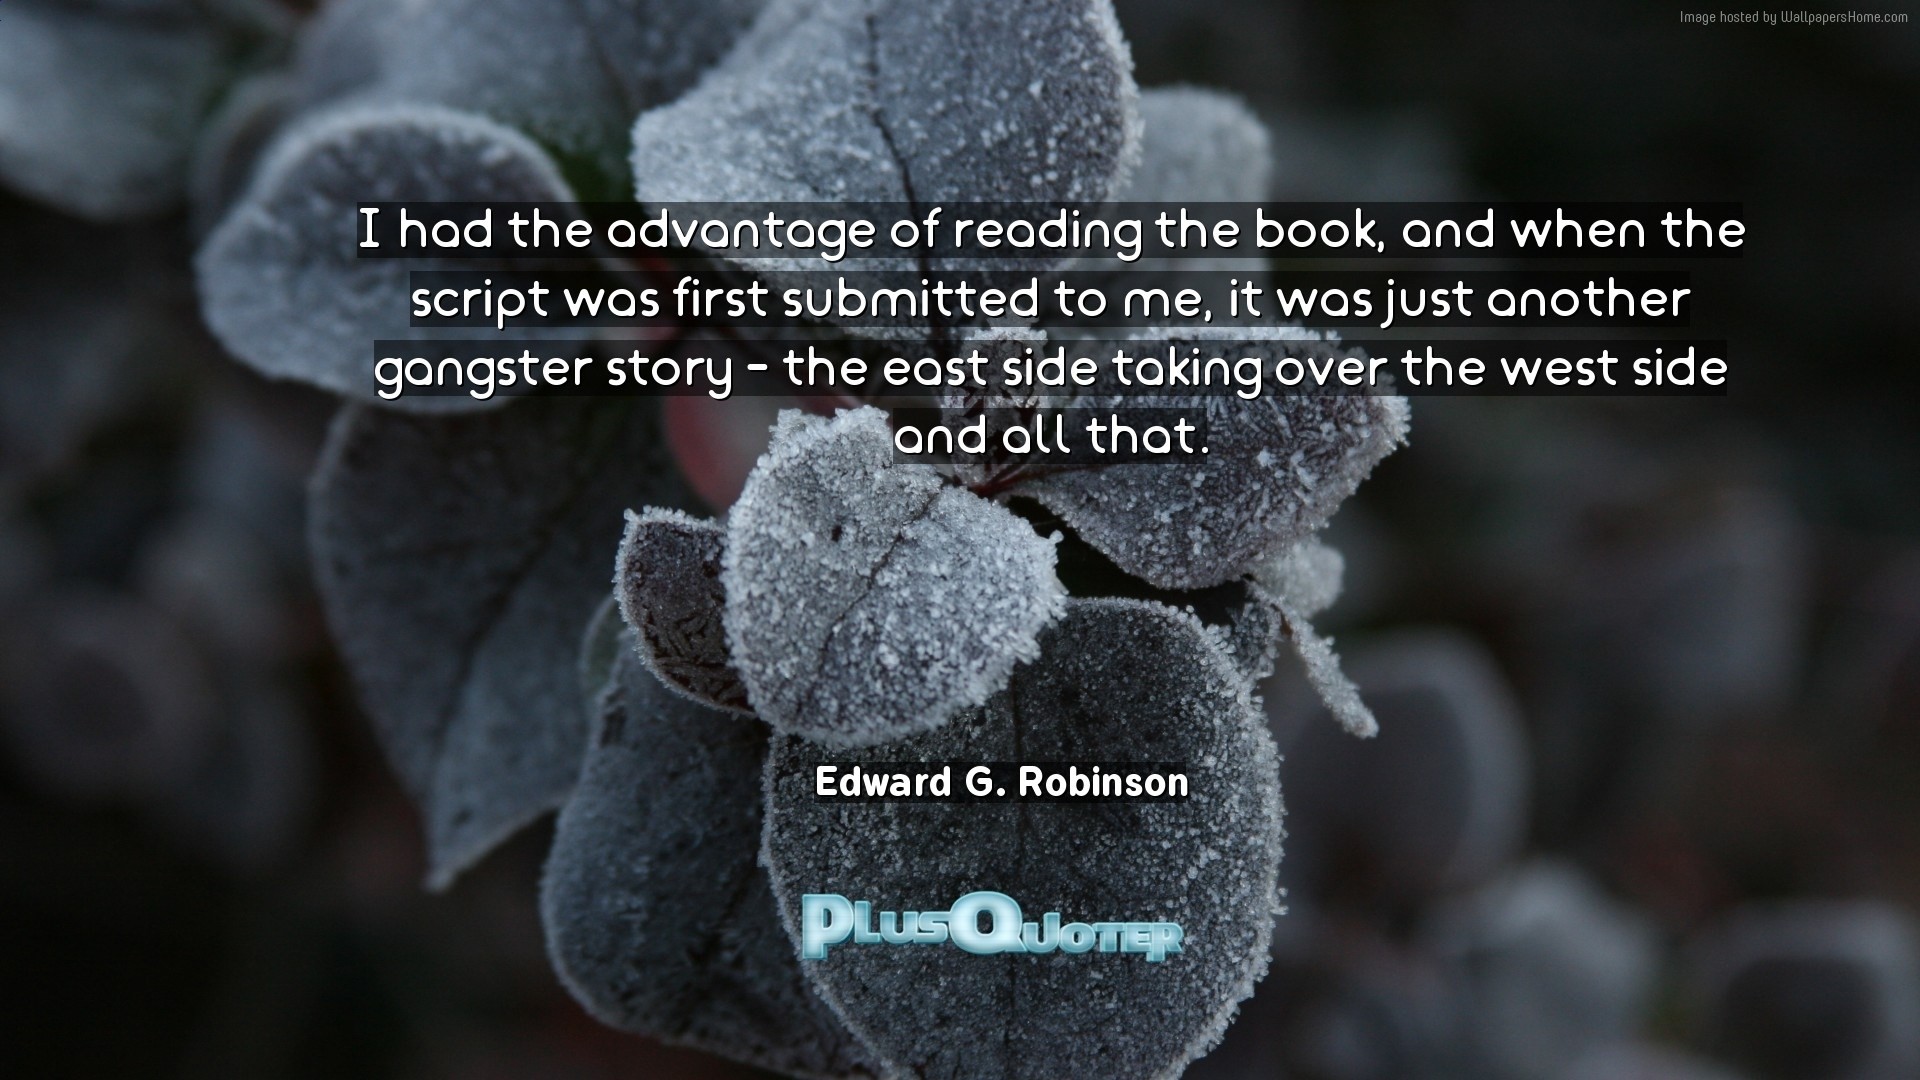 1920x1080 Download Wallpaper with inspirational Quotes- "I had the advantage of  reading the book,